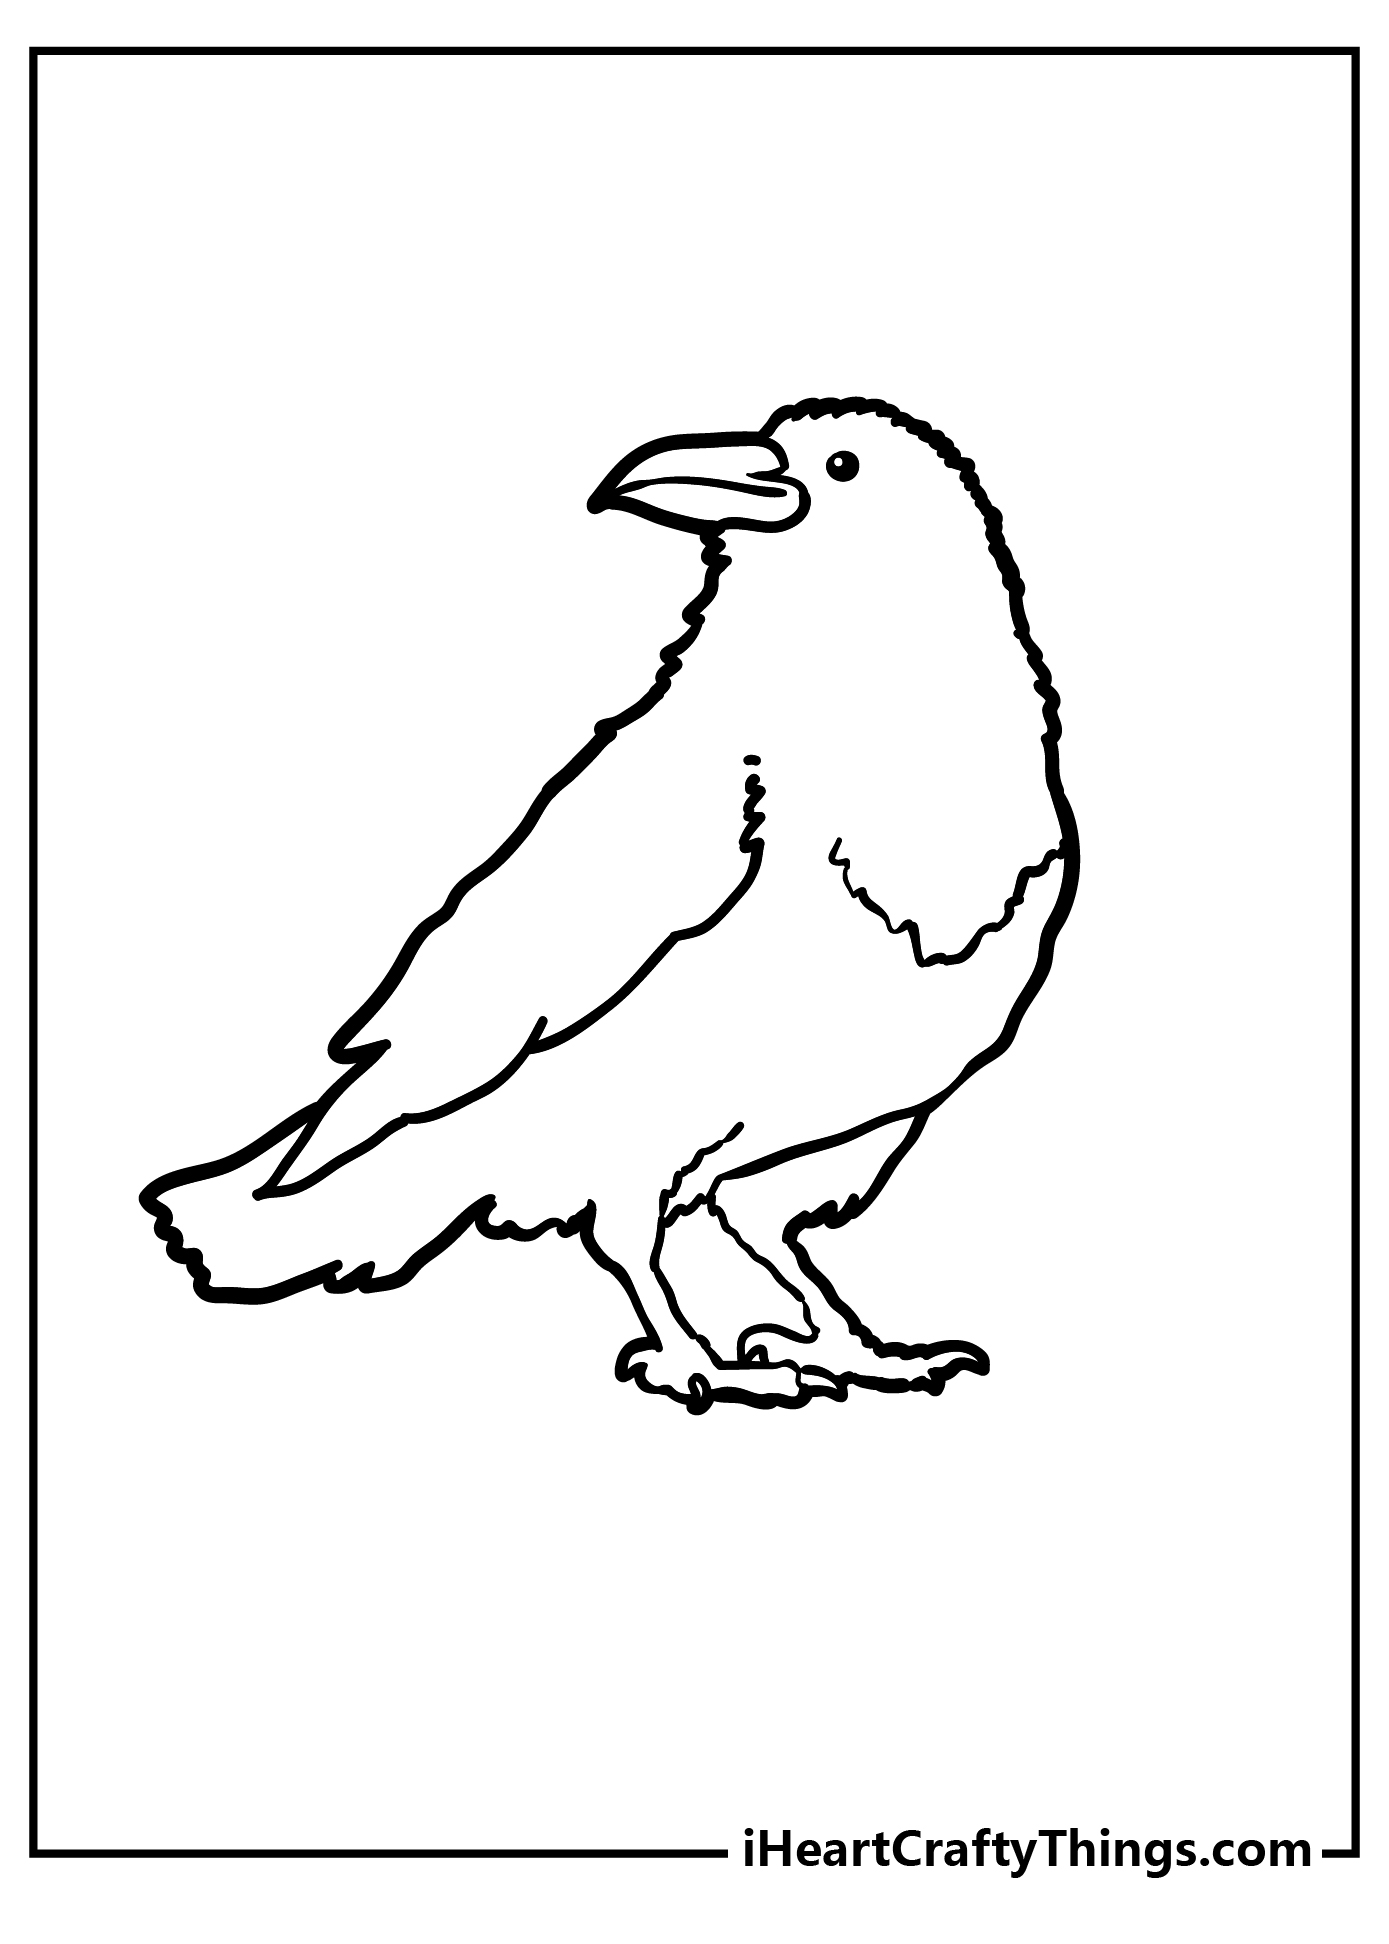 Raven Coloring Pages for preschoolers free printable